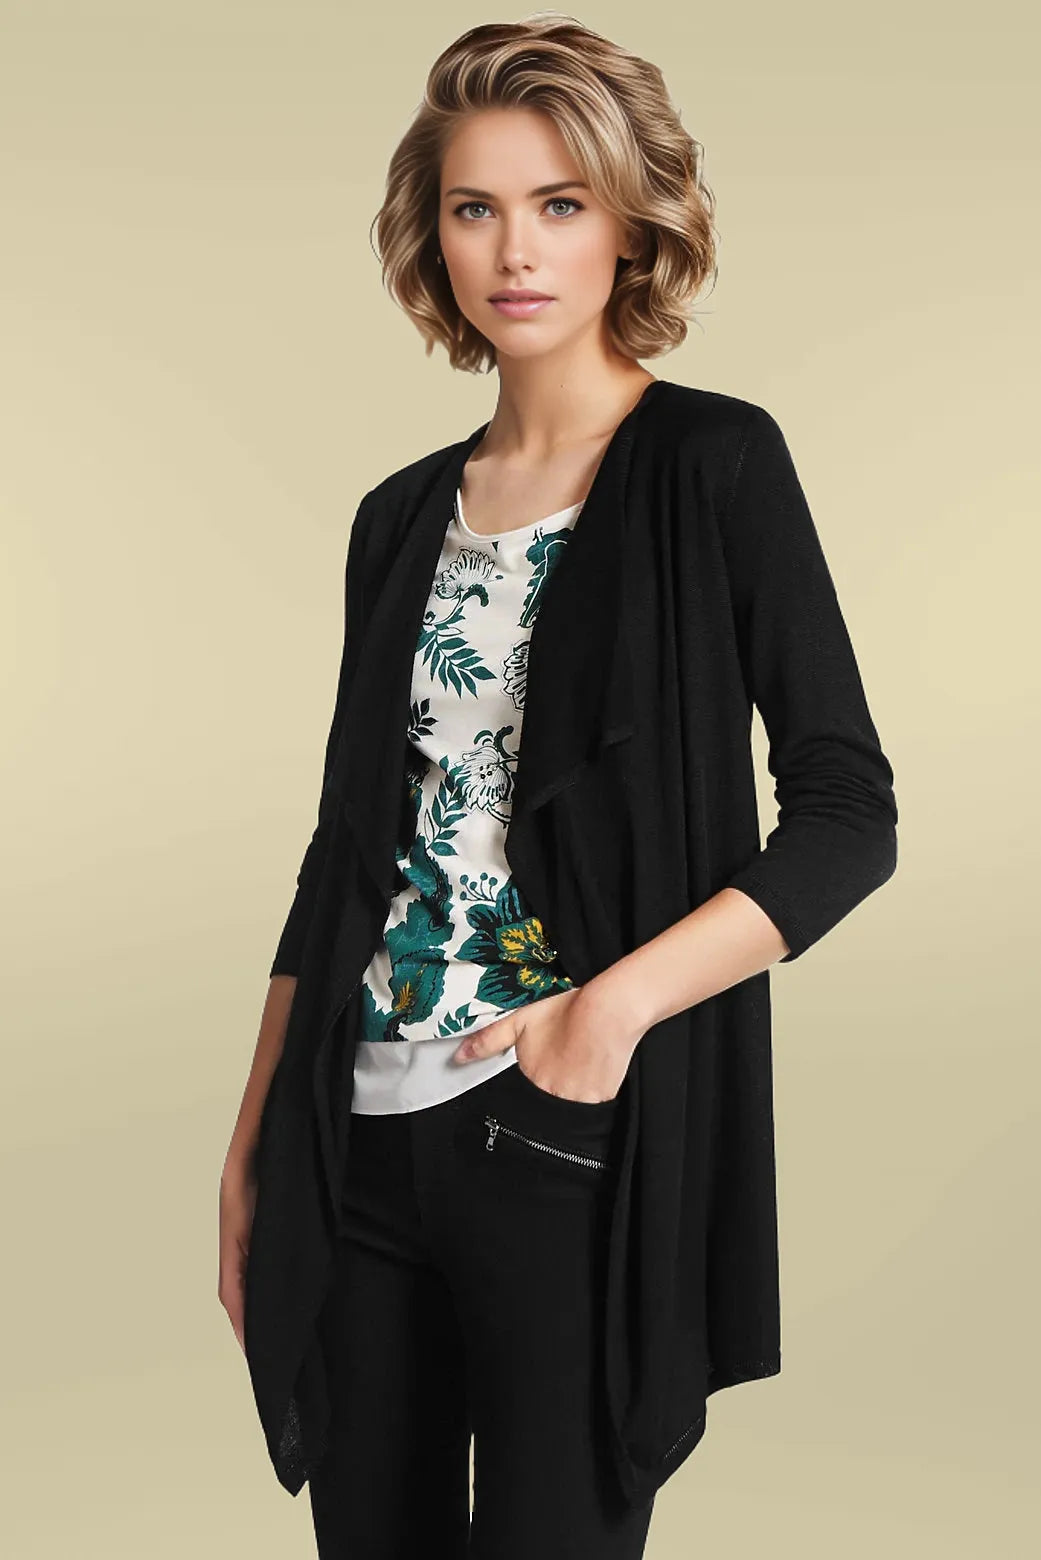 M&S Open Front Waterfall Cardigan